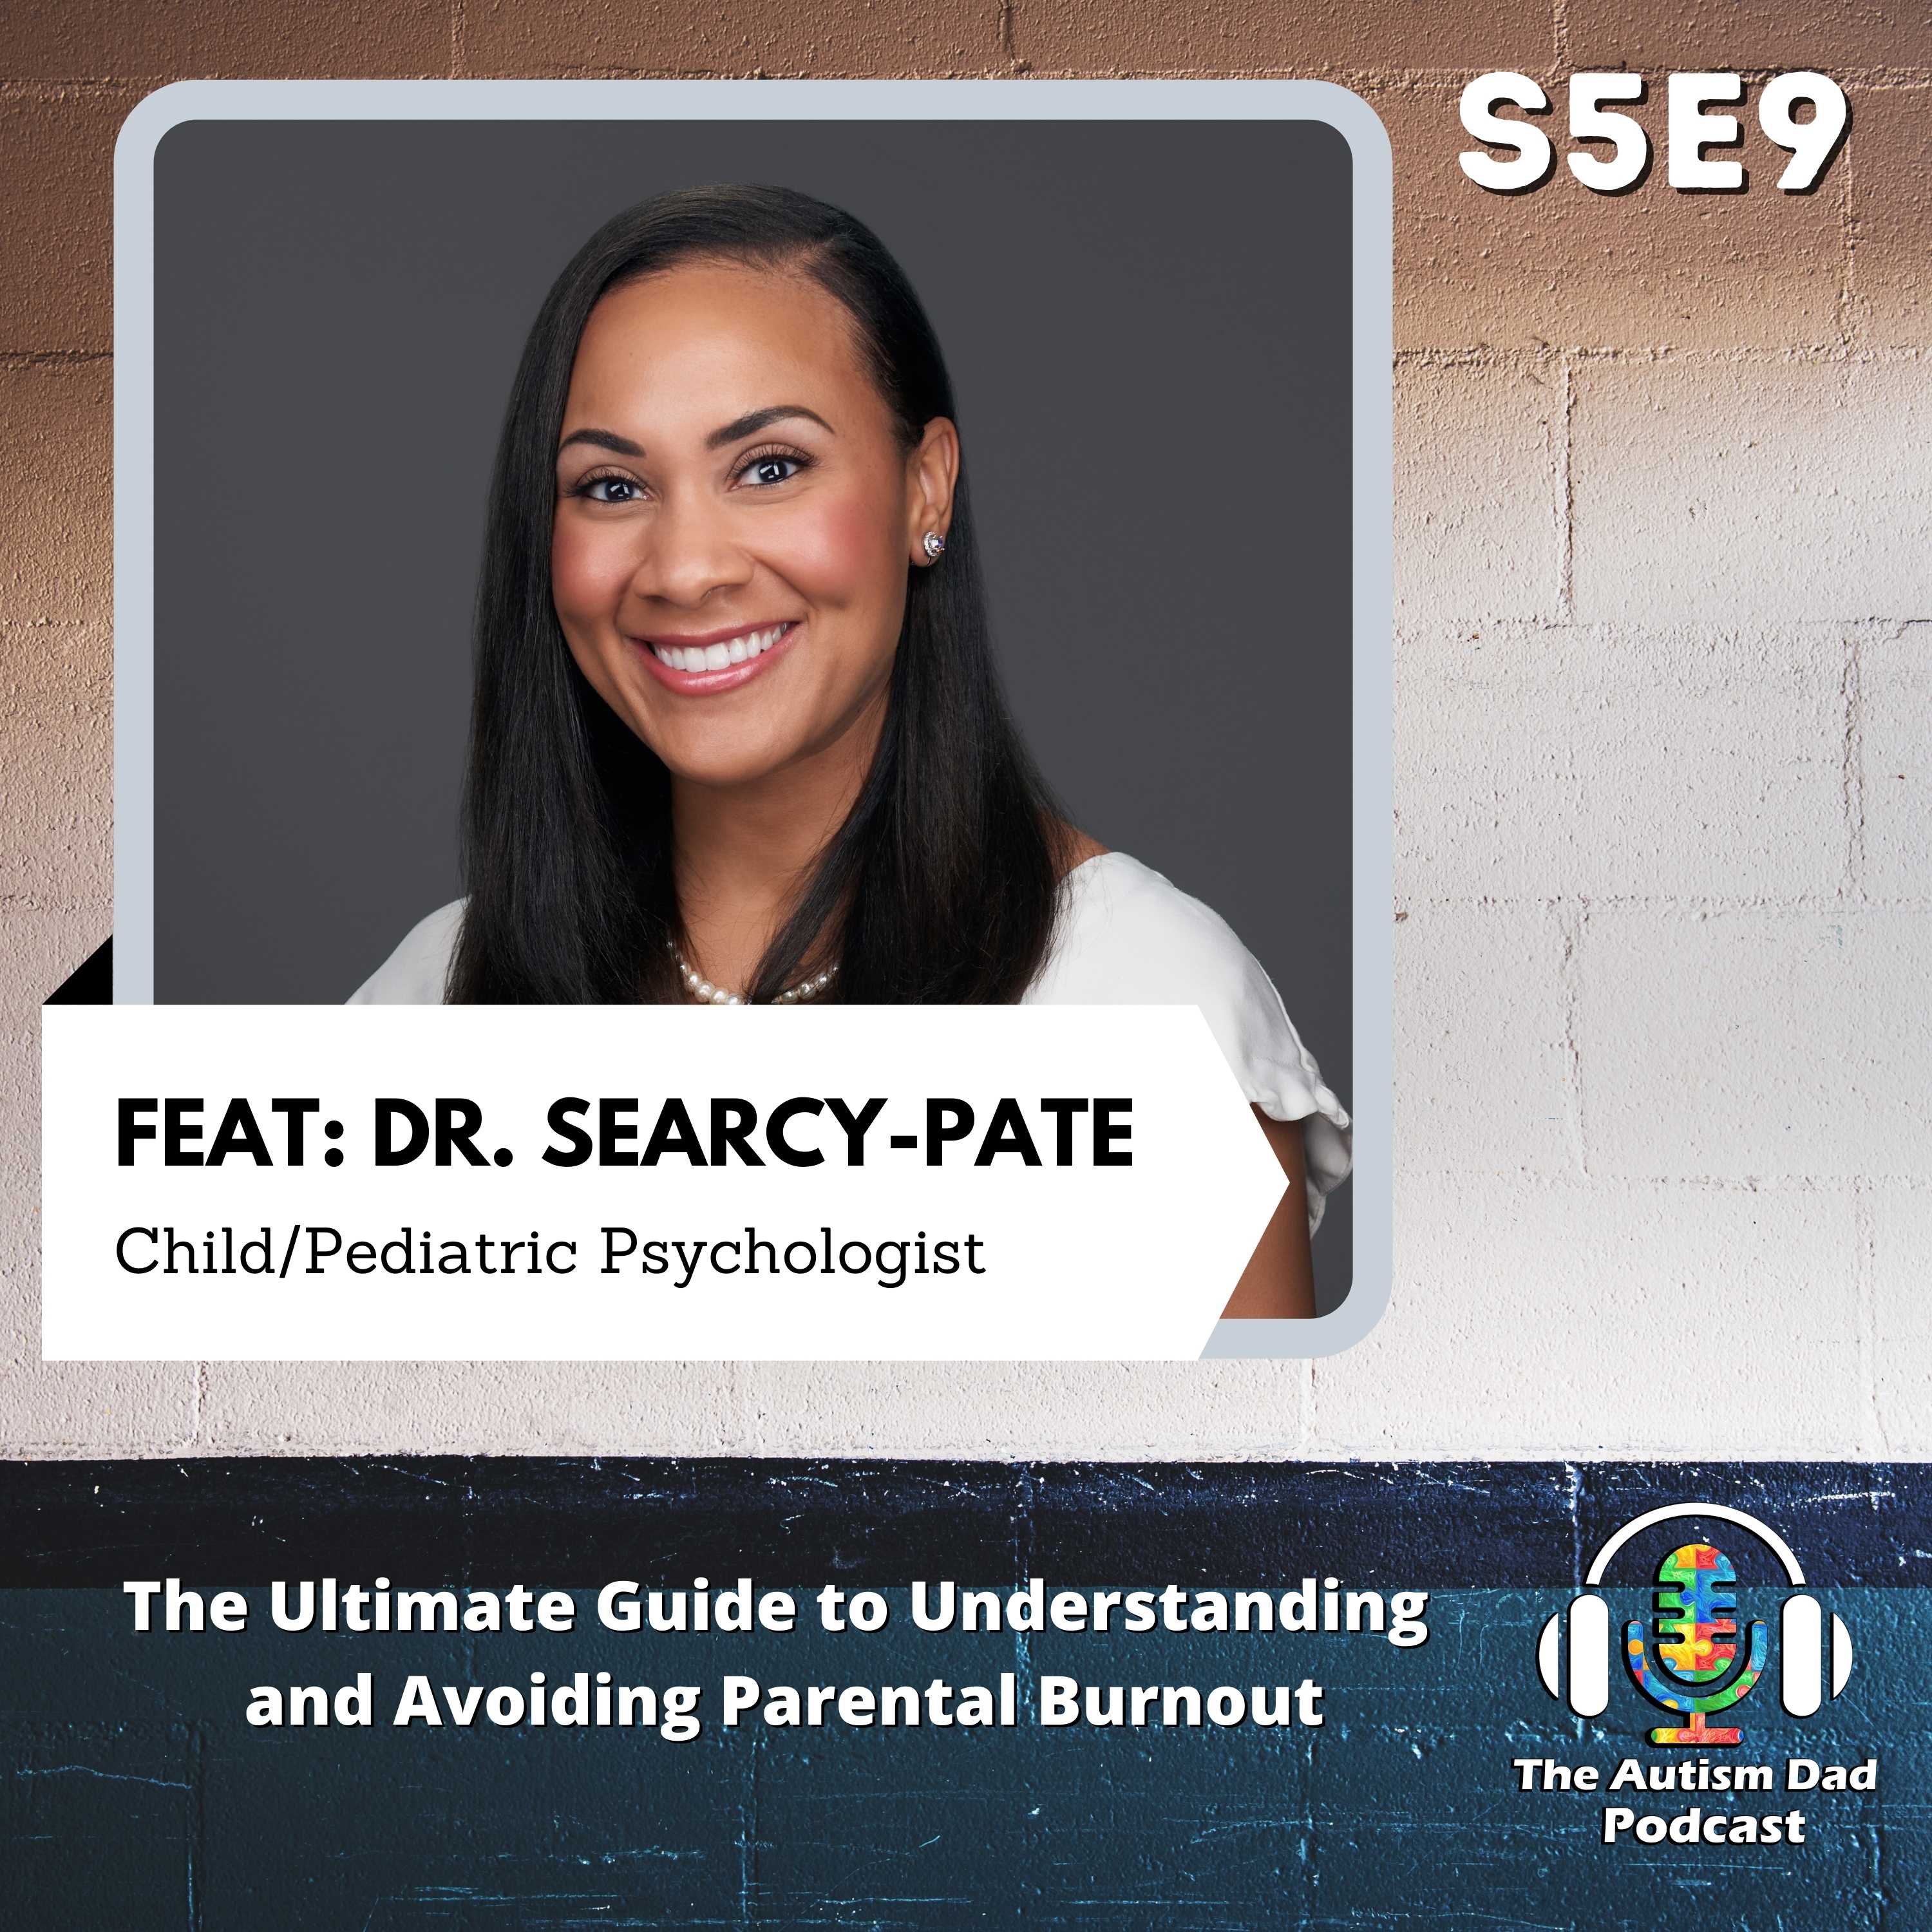 The Ultimate Guide to Understanding and Avoiding Parental Burnout (feat. Dr. Searcy-Pace) S5E9 Image